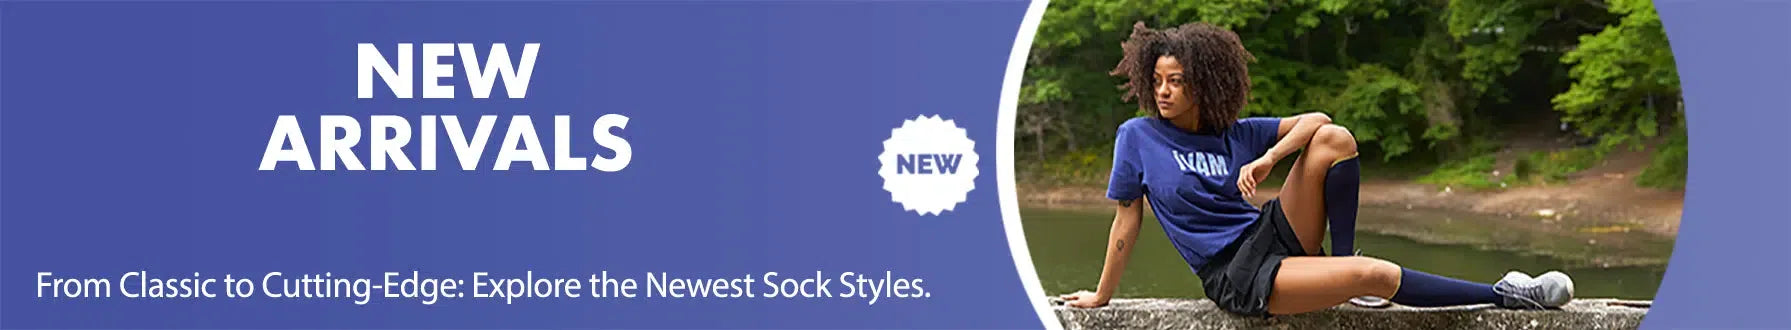 GoWith new socks collection banner desktop